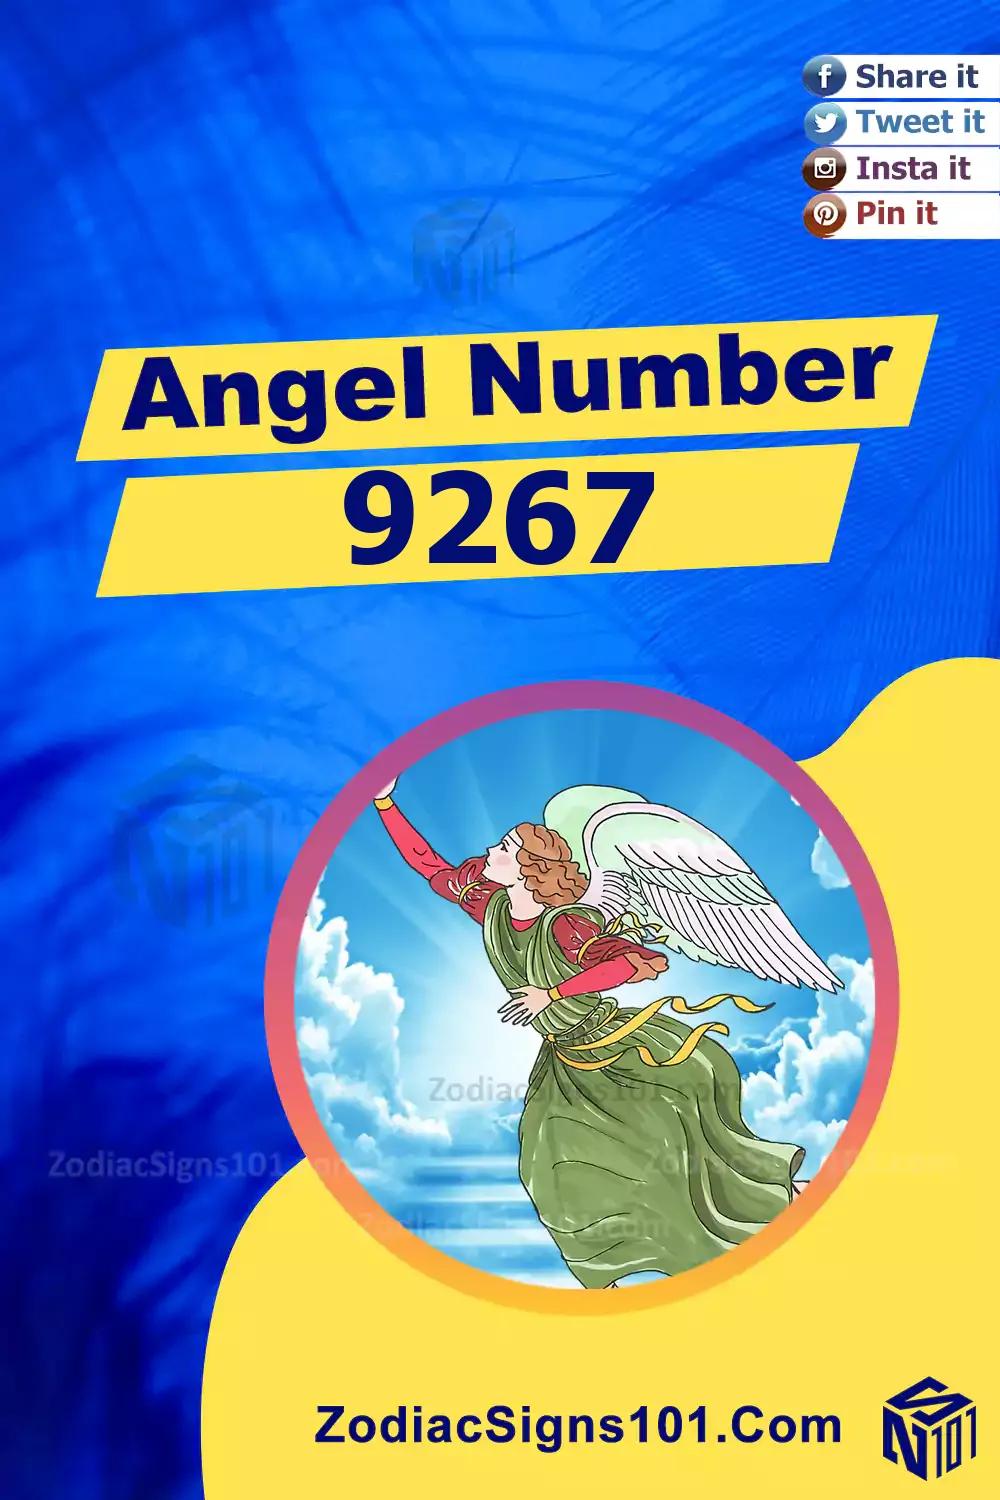 9267 Angel Number Meaning